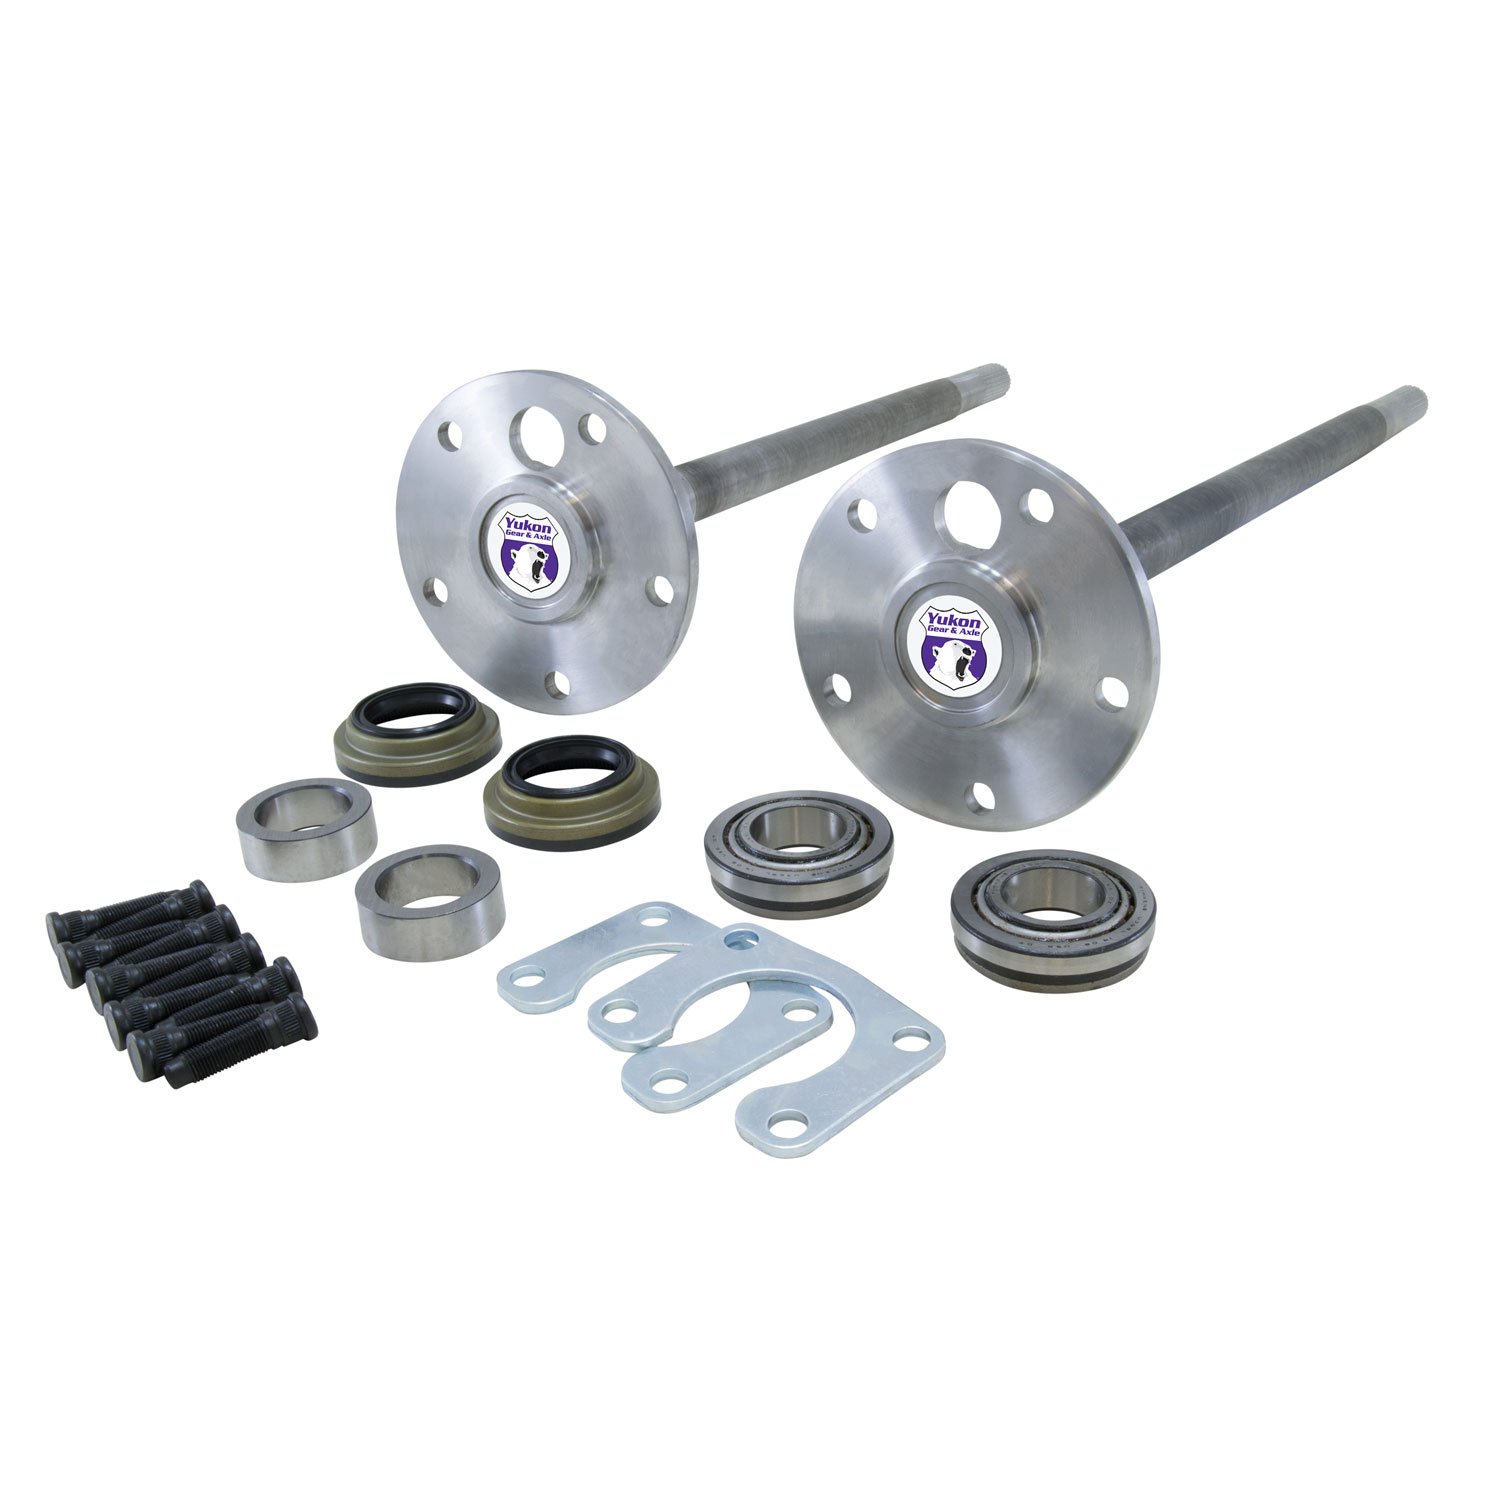 1541H Alloy Rear Axle Kit For Ford 9 in. Bronco From '74-'75 With 35 Splines